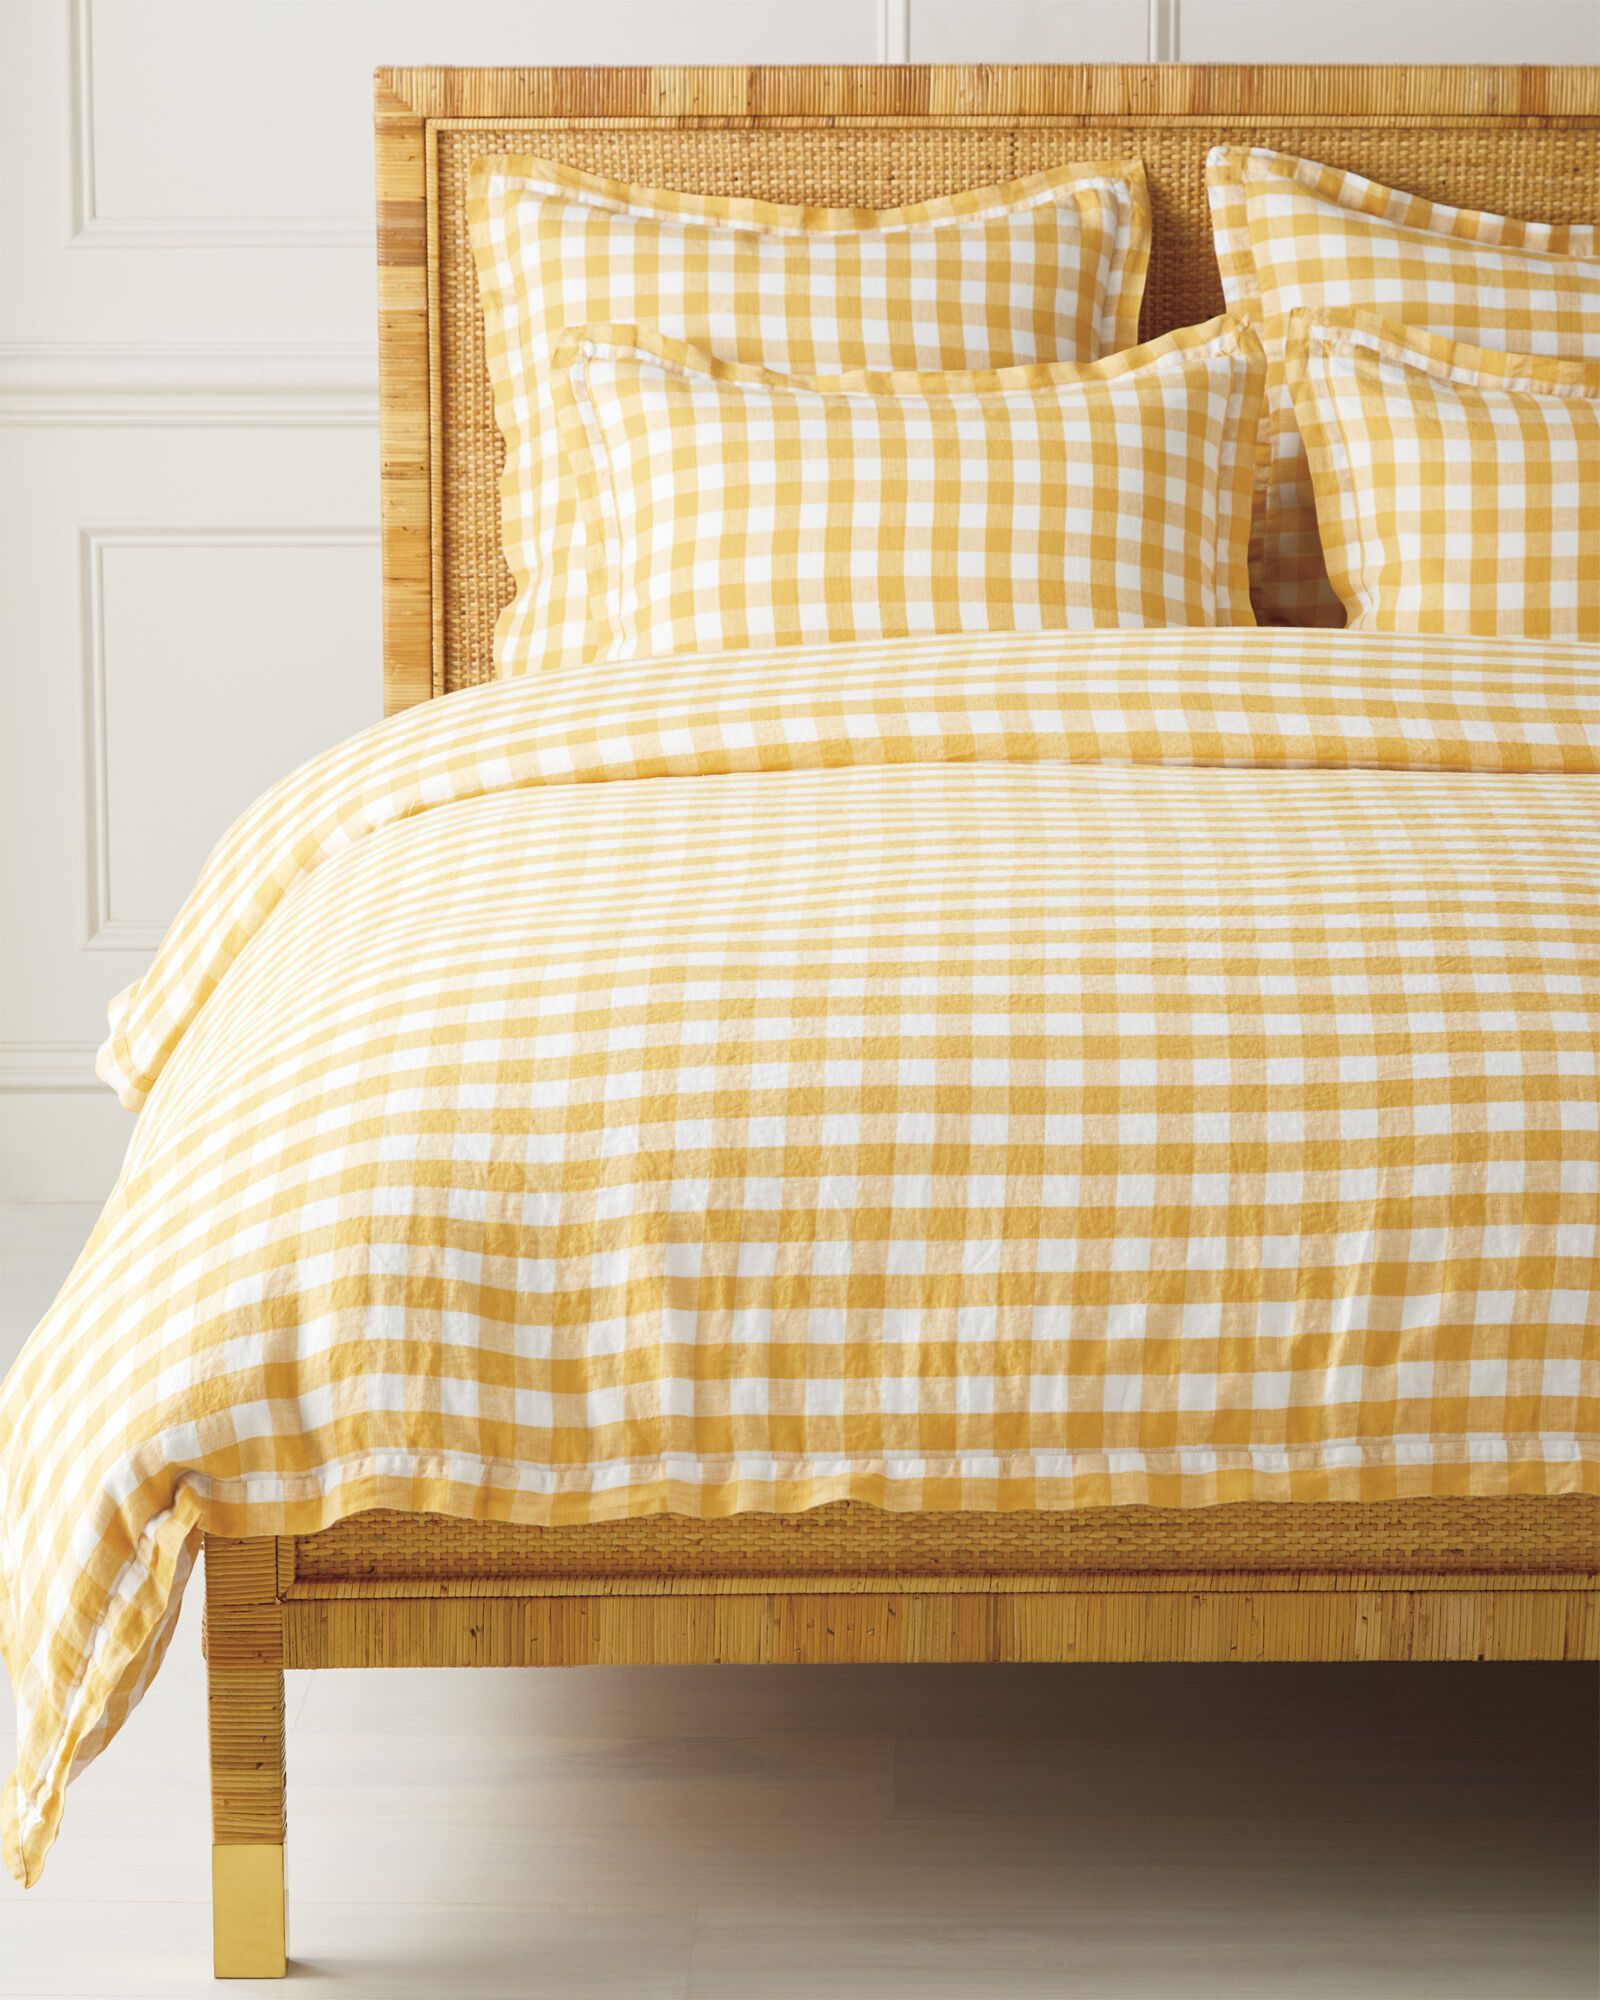 Hyannis Duvet Cover - Sunflower | Serena and Lily